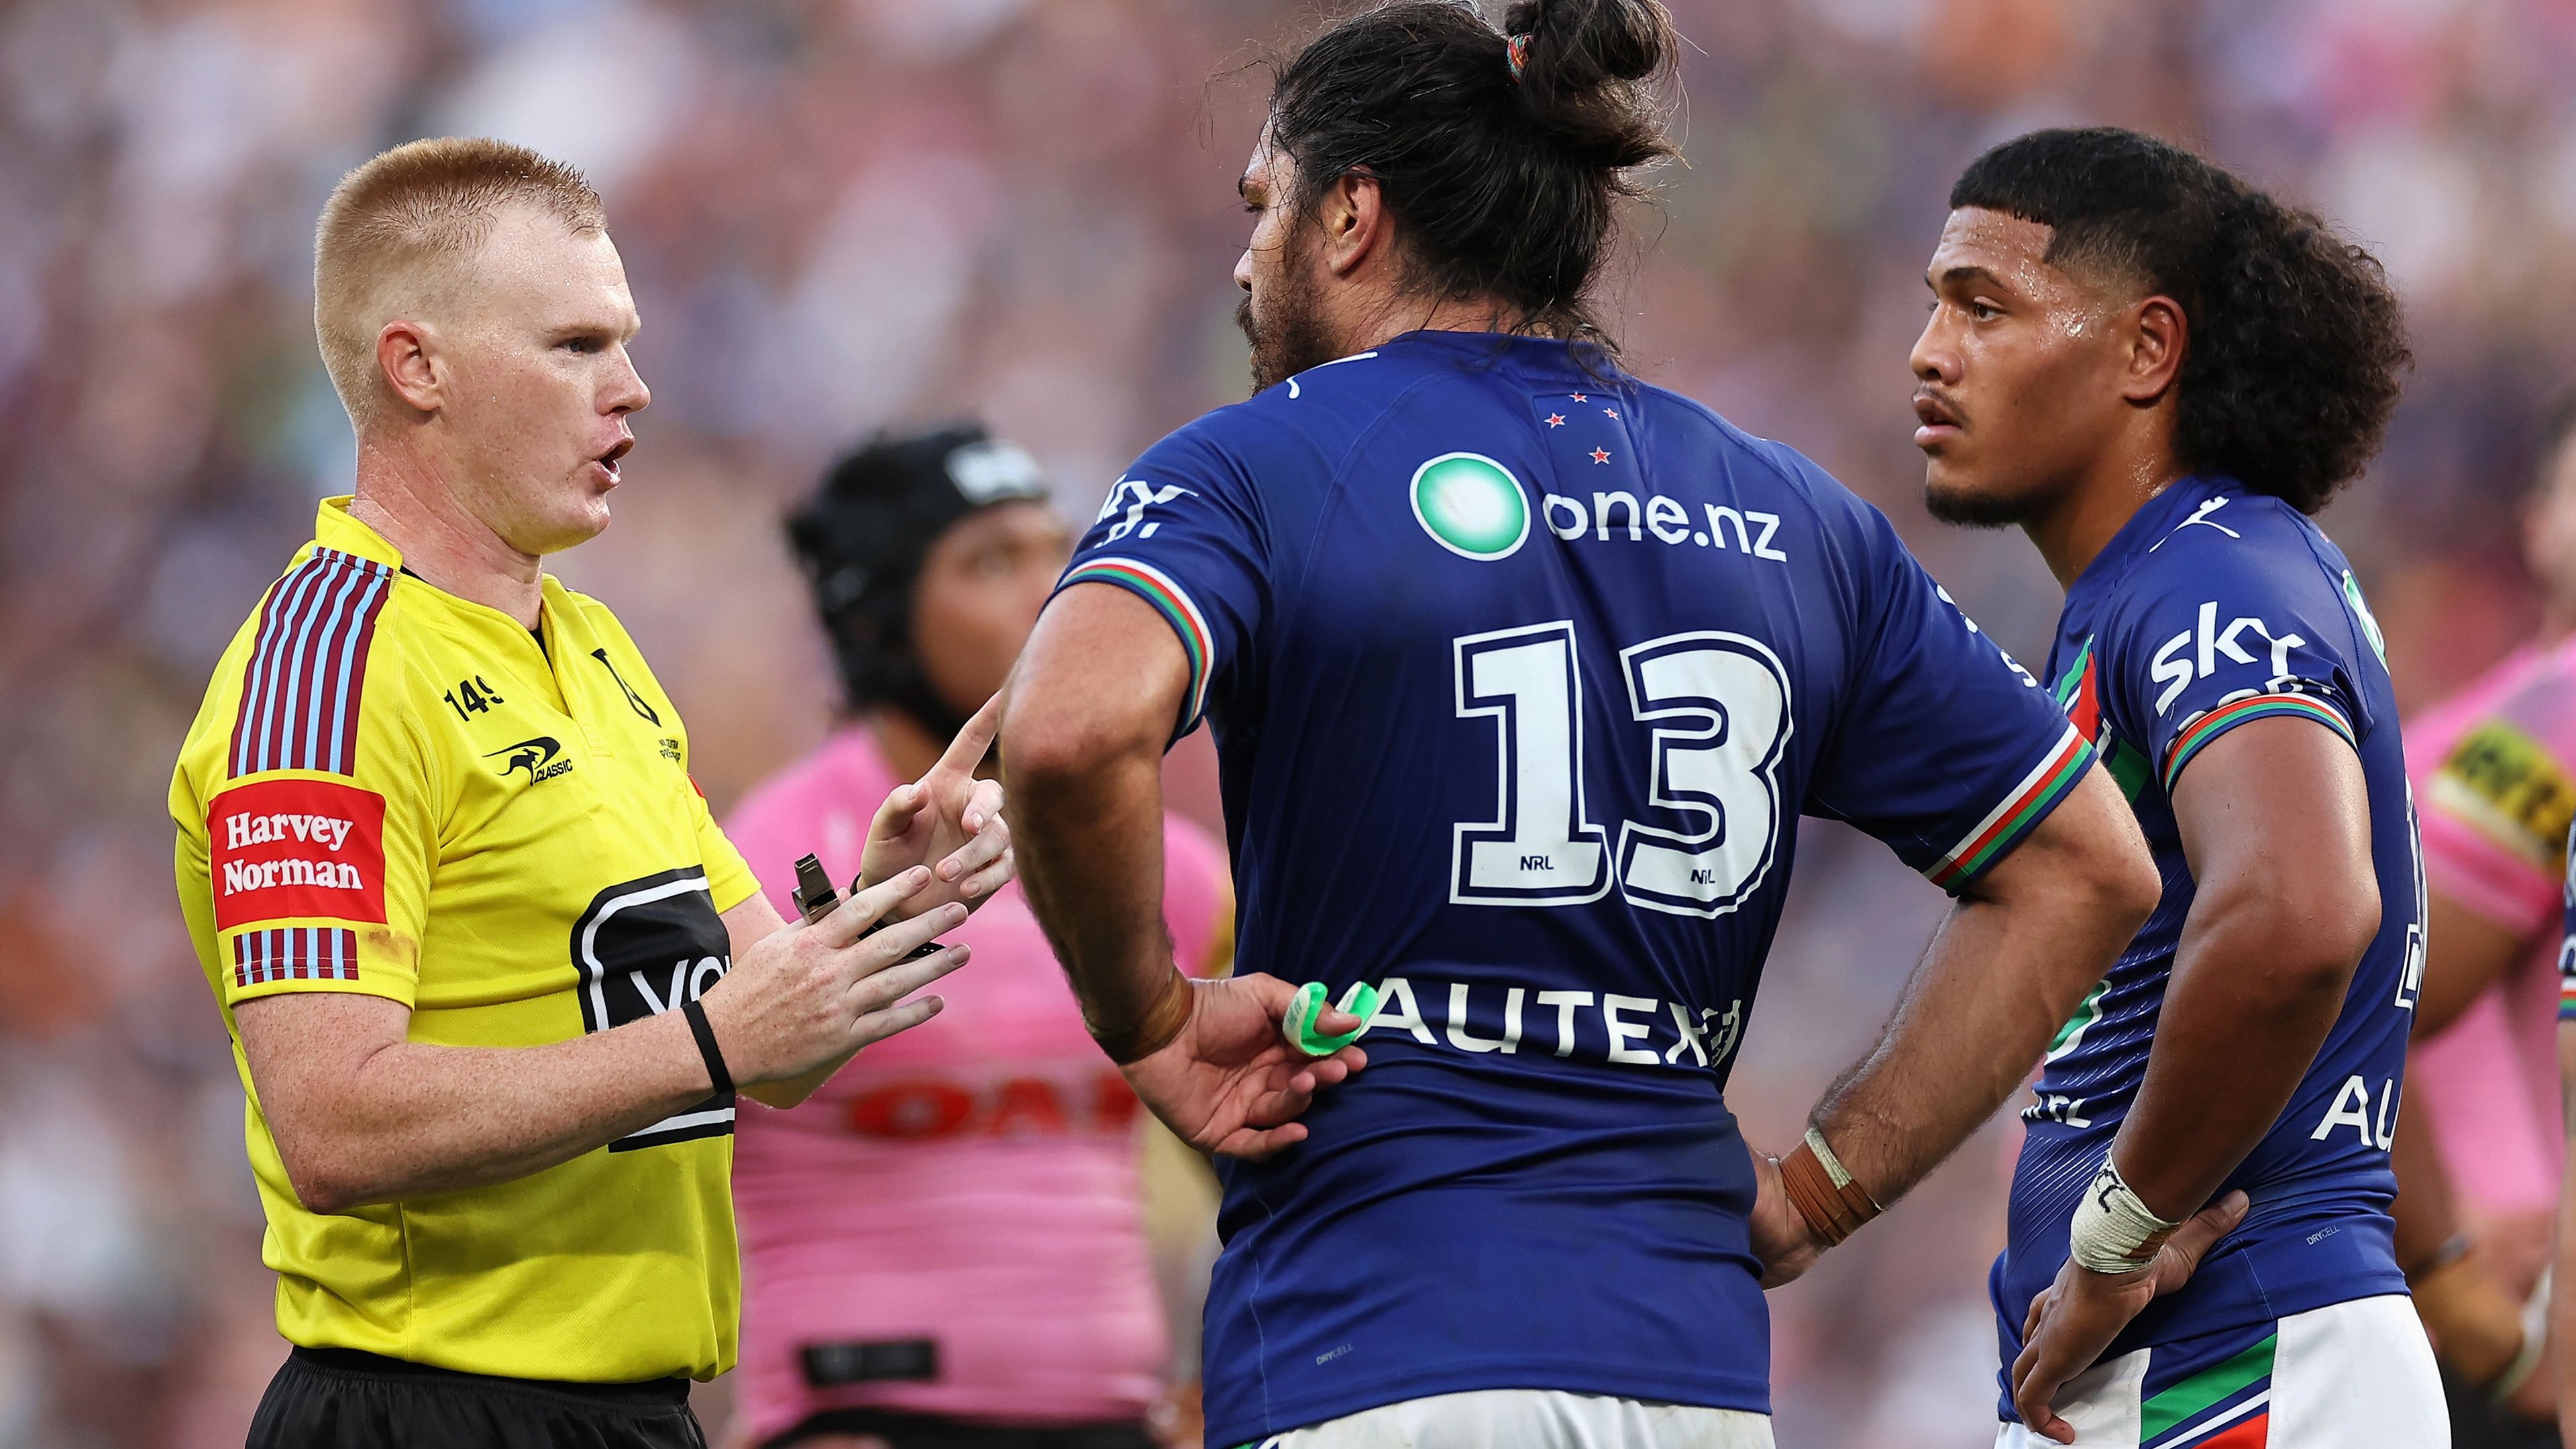 'Needs to be said:' Disgusted Warriors great throws fuel on fire over refereeing calls